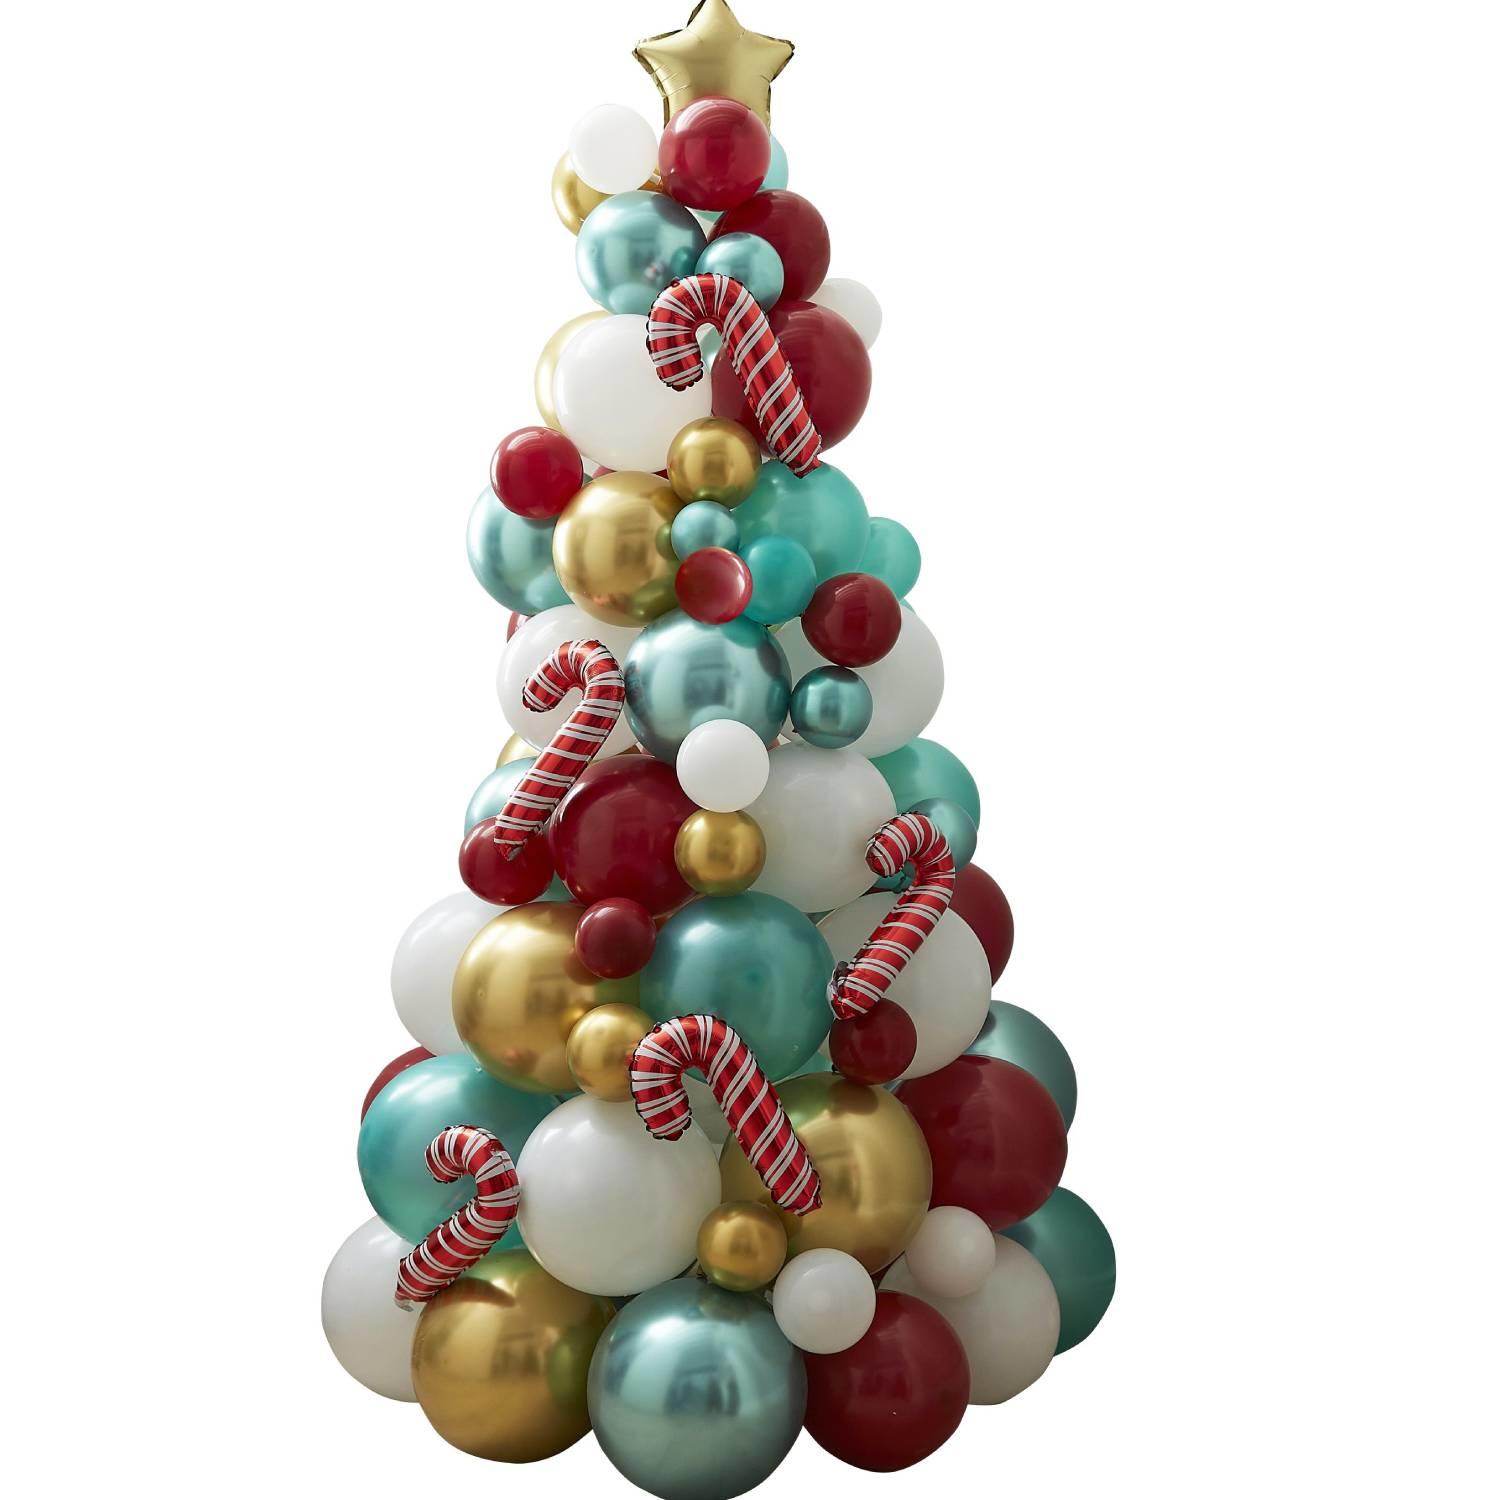 Christmas Balloon Tree 1.8m by Ginger Ray MRY-106  available here at Karnival Costumes online Christmas party shop